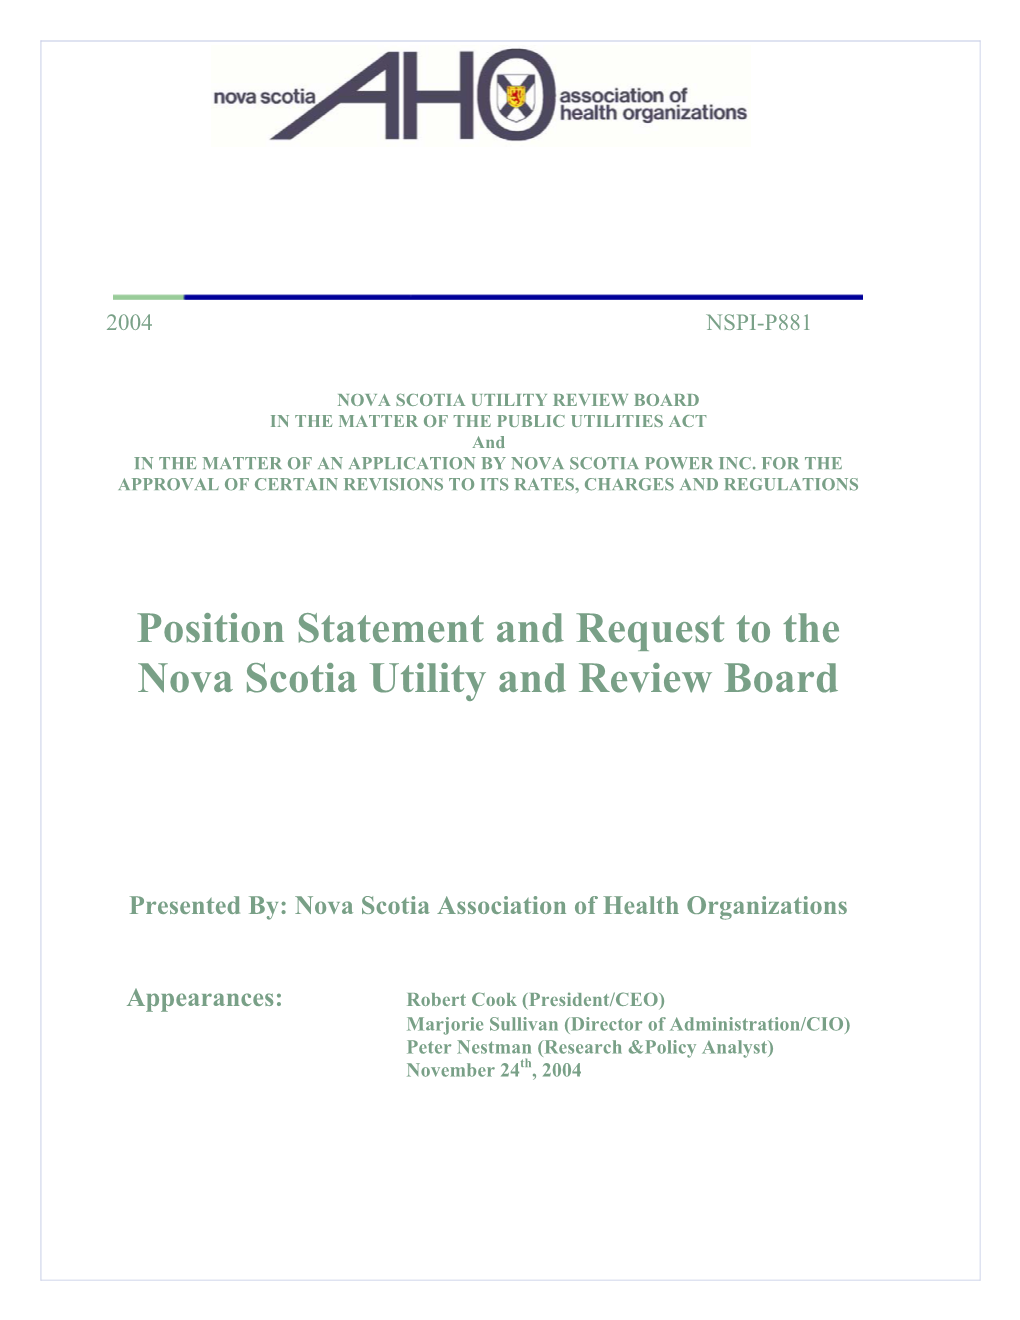 Position Statement and Request to the Nova Scotia Utility and Review Board